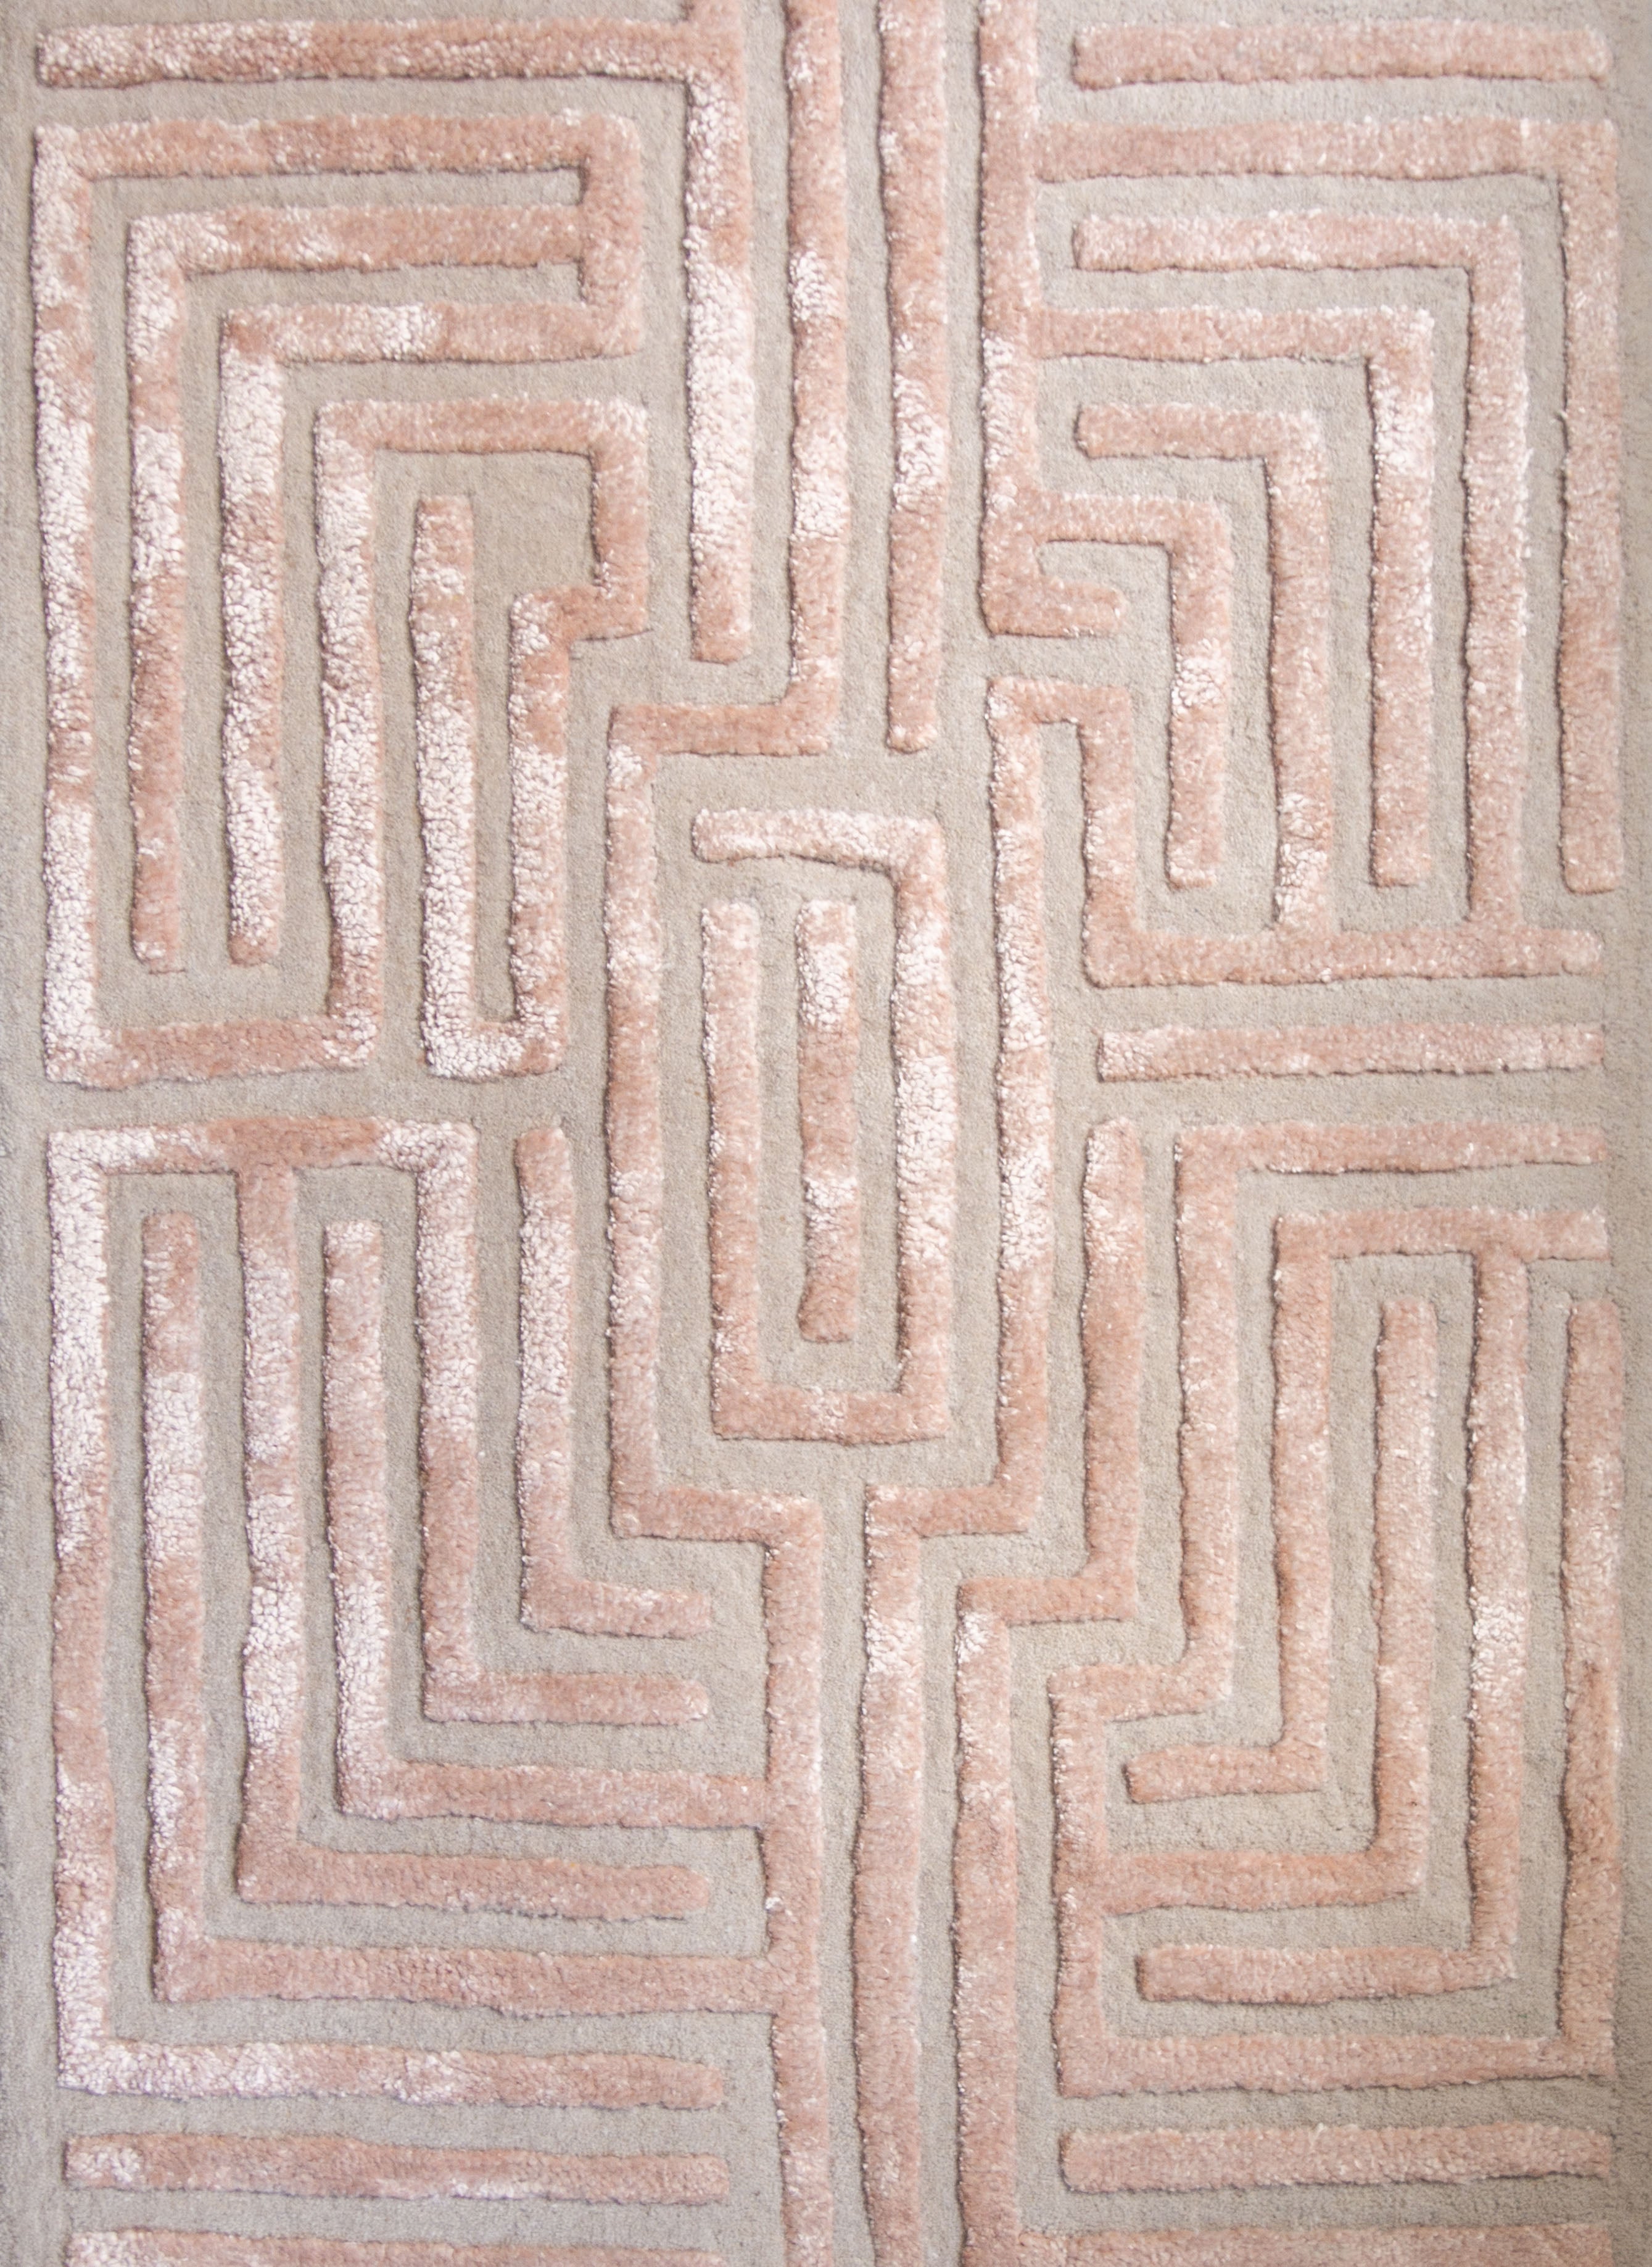 Maze luxury floor rug with a wheat tan border outlining a beige maze